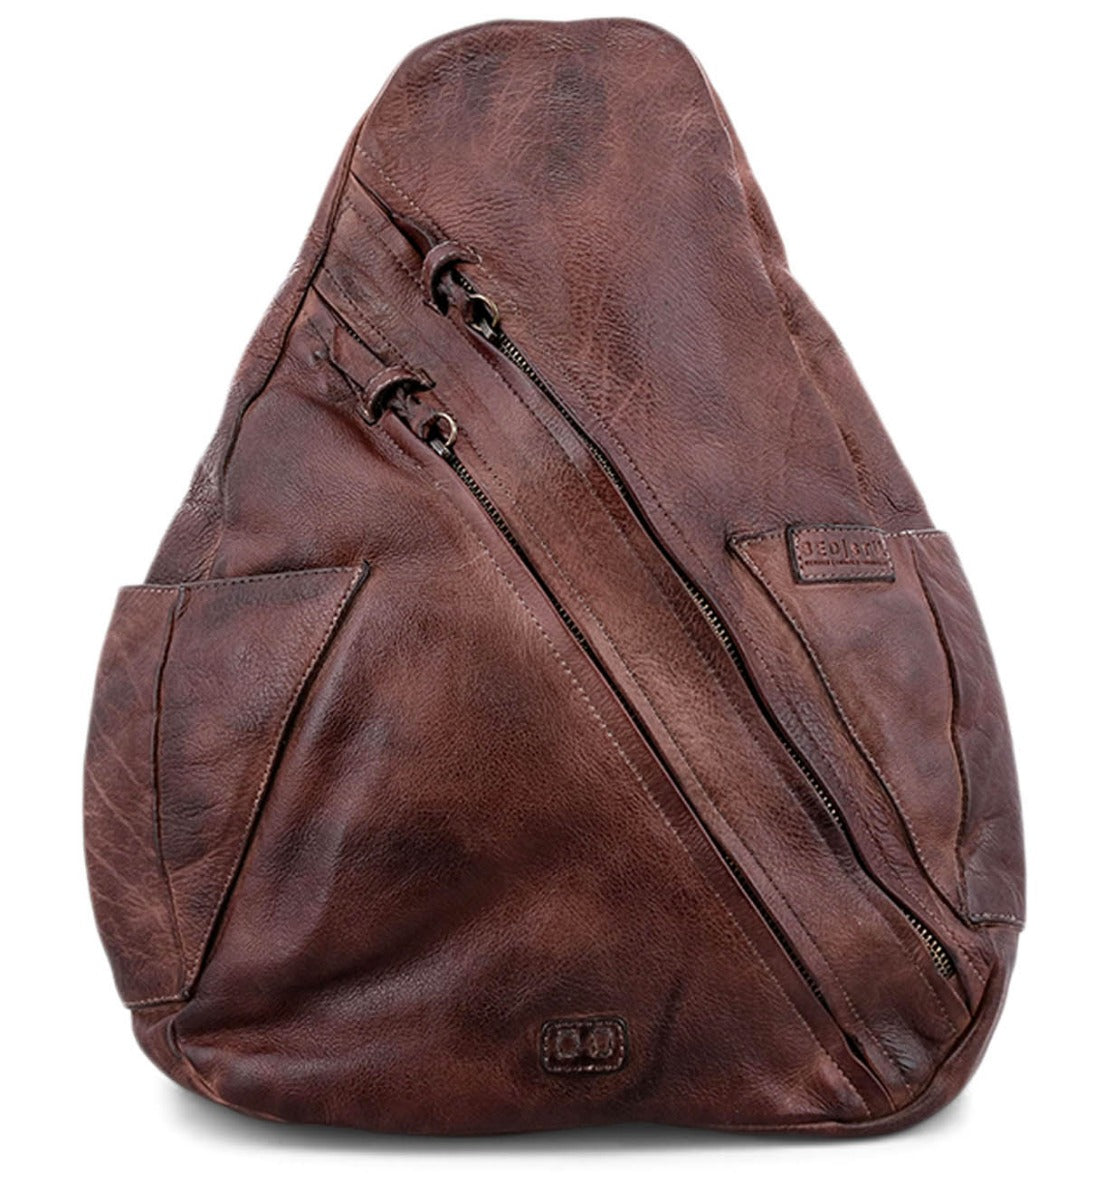 A brown leather Tommie backpack with a zipper from the Bed Stu brand name.